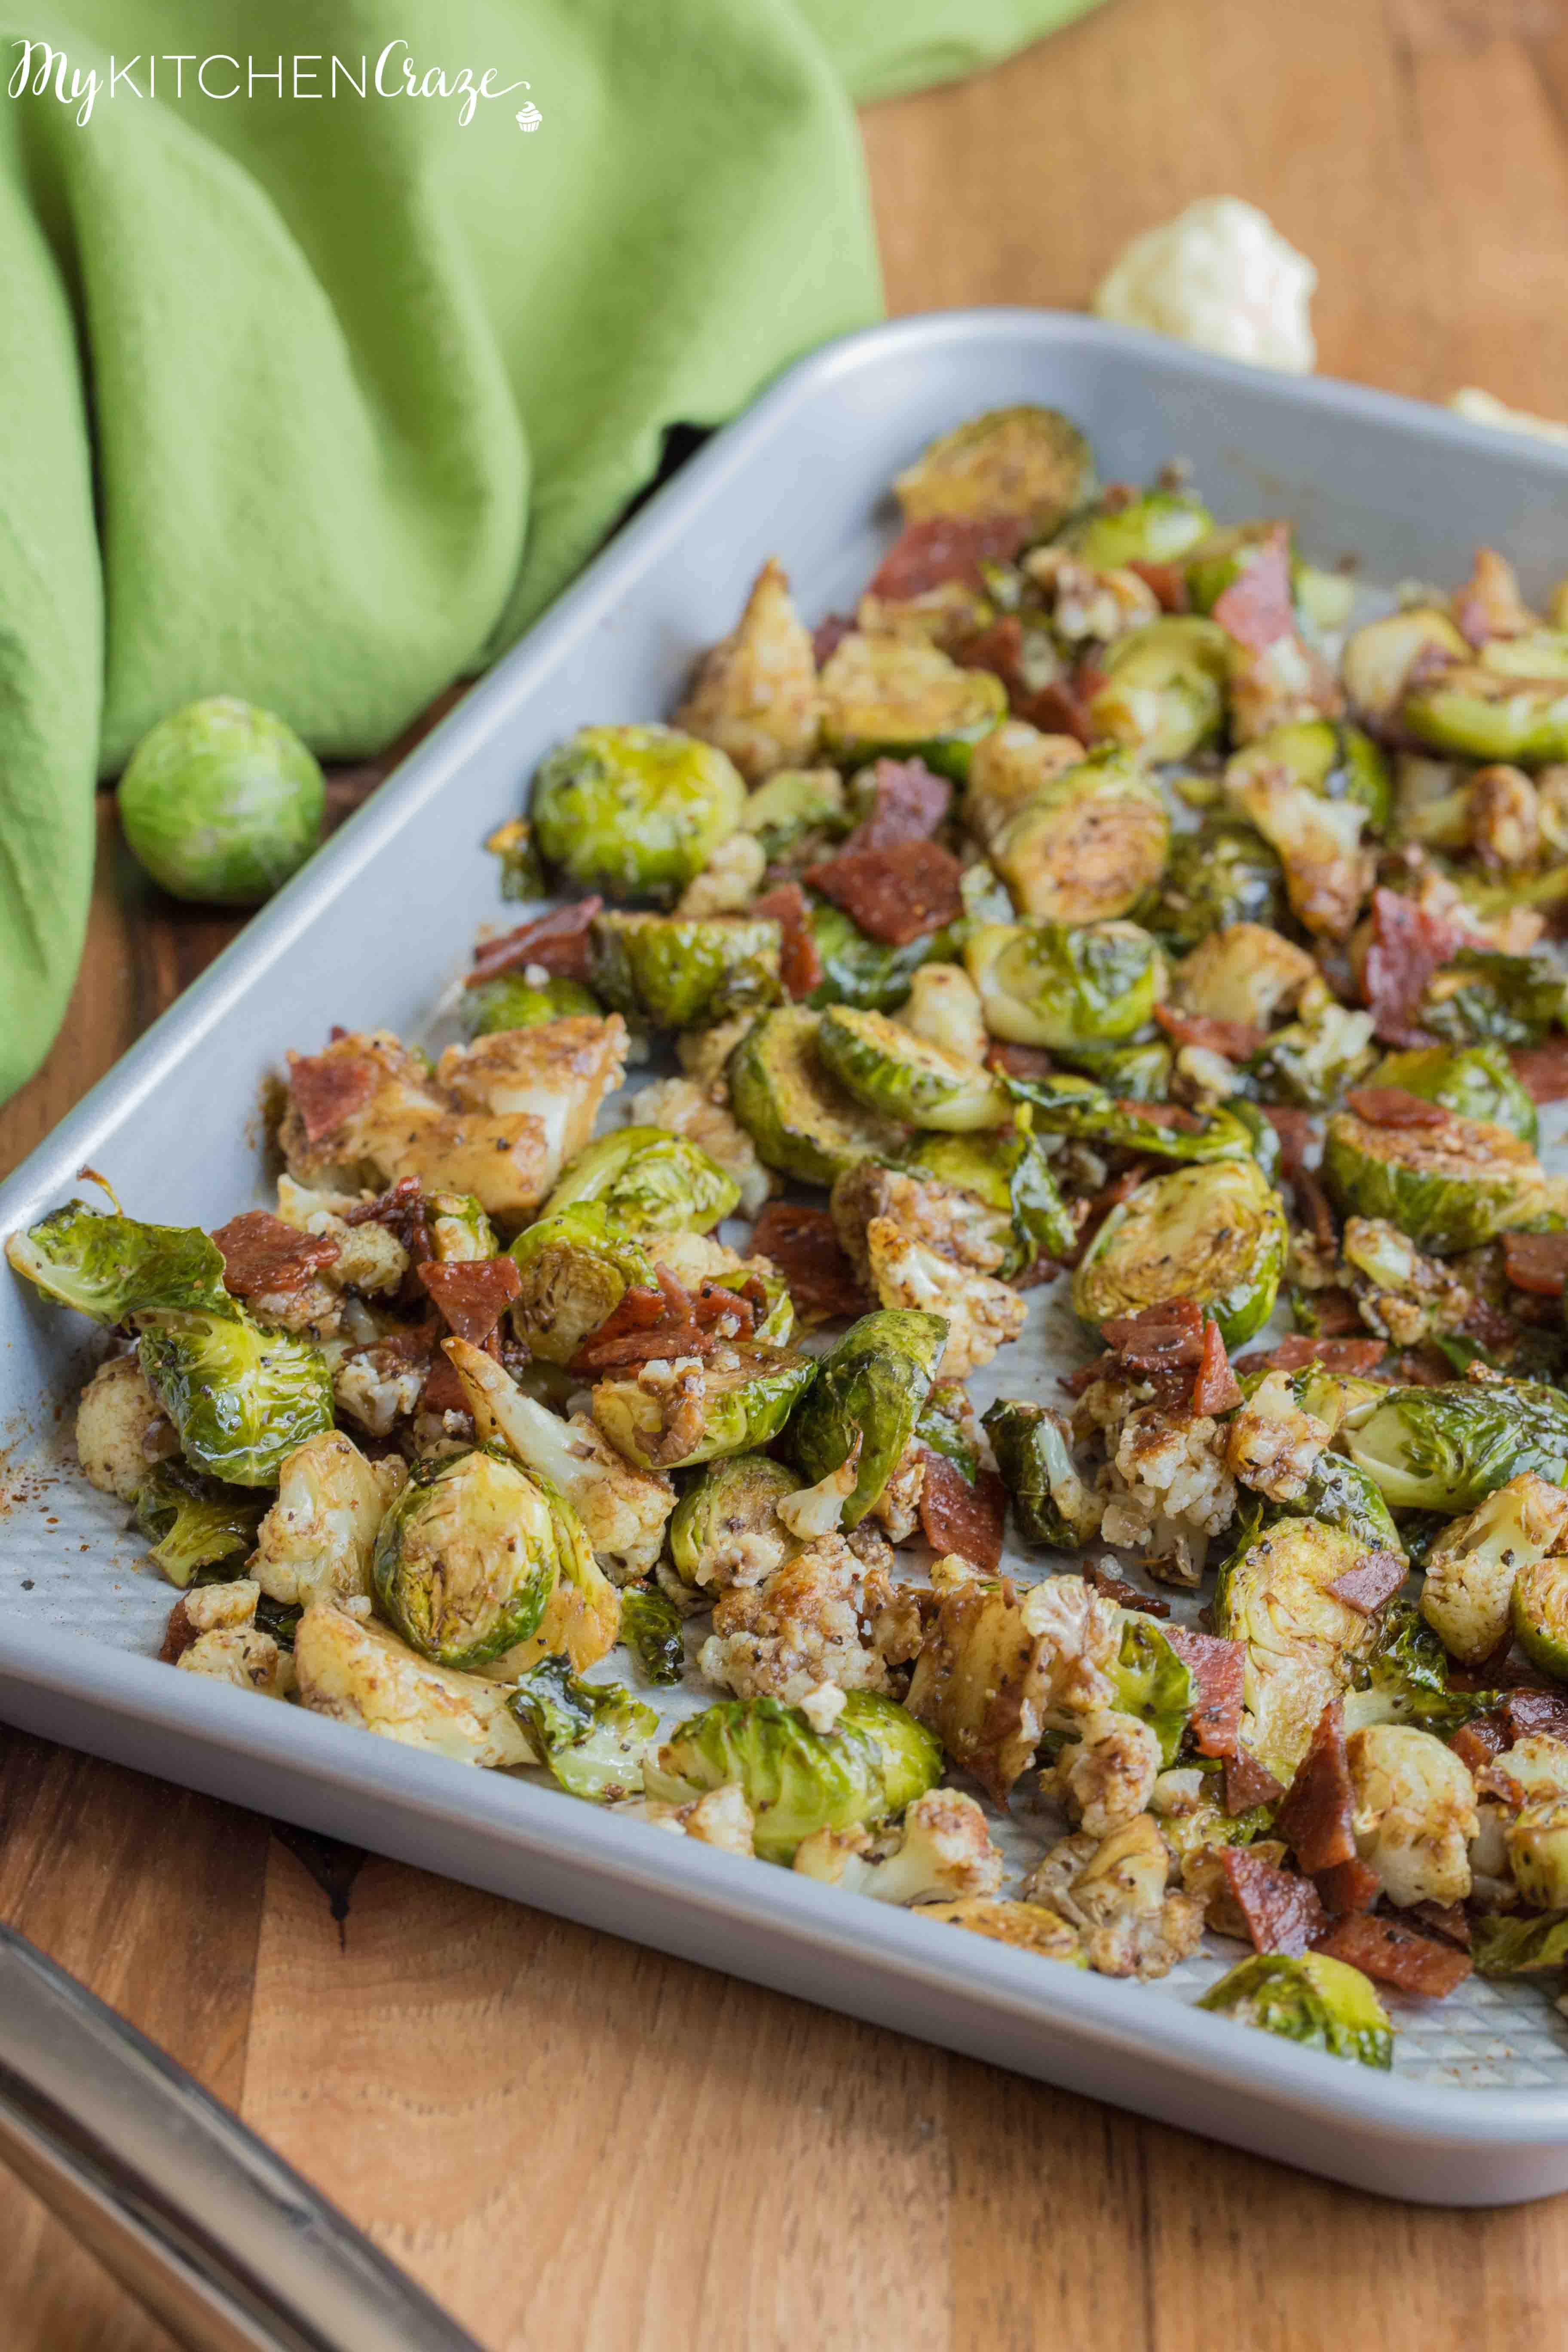 Roasted Brussel Sprouts with Bacon & Cauliflower ~ mykitchencraze.com ~ A delicious side dish loaded with roasted Brussel Sprouts and cauliflower, crispy bacon. Then topped with a delicious balsamic vinaigrette. It's the perfect side dish for any meat and the kids will love it!